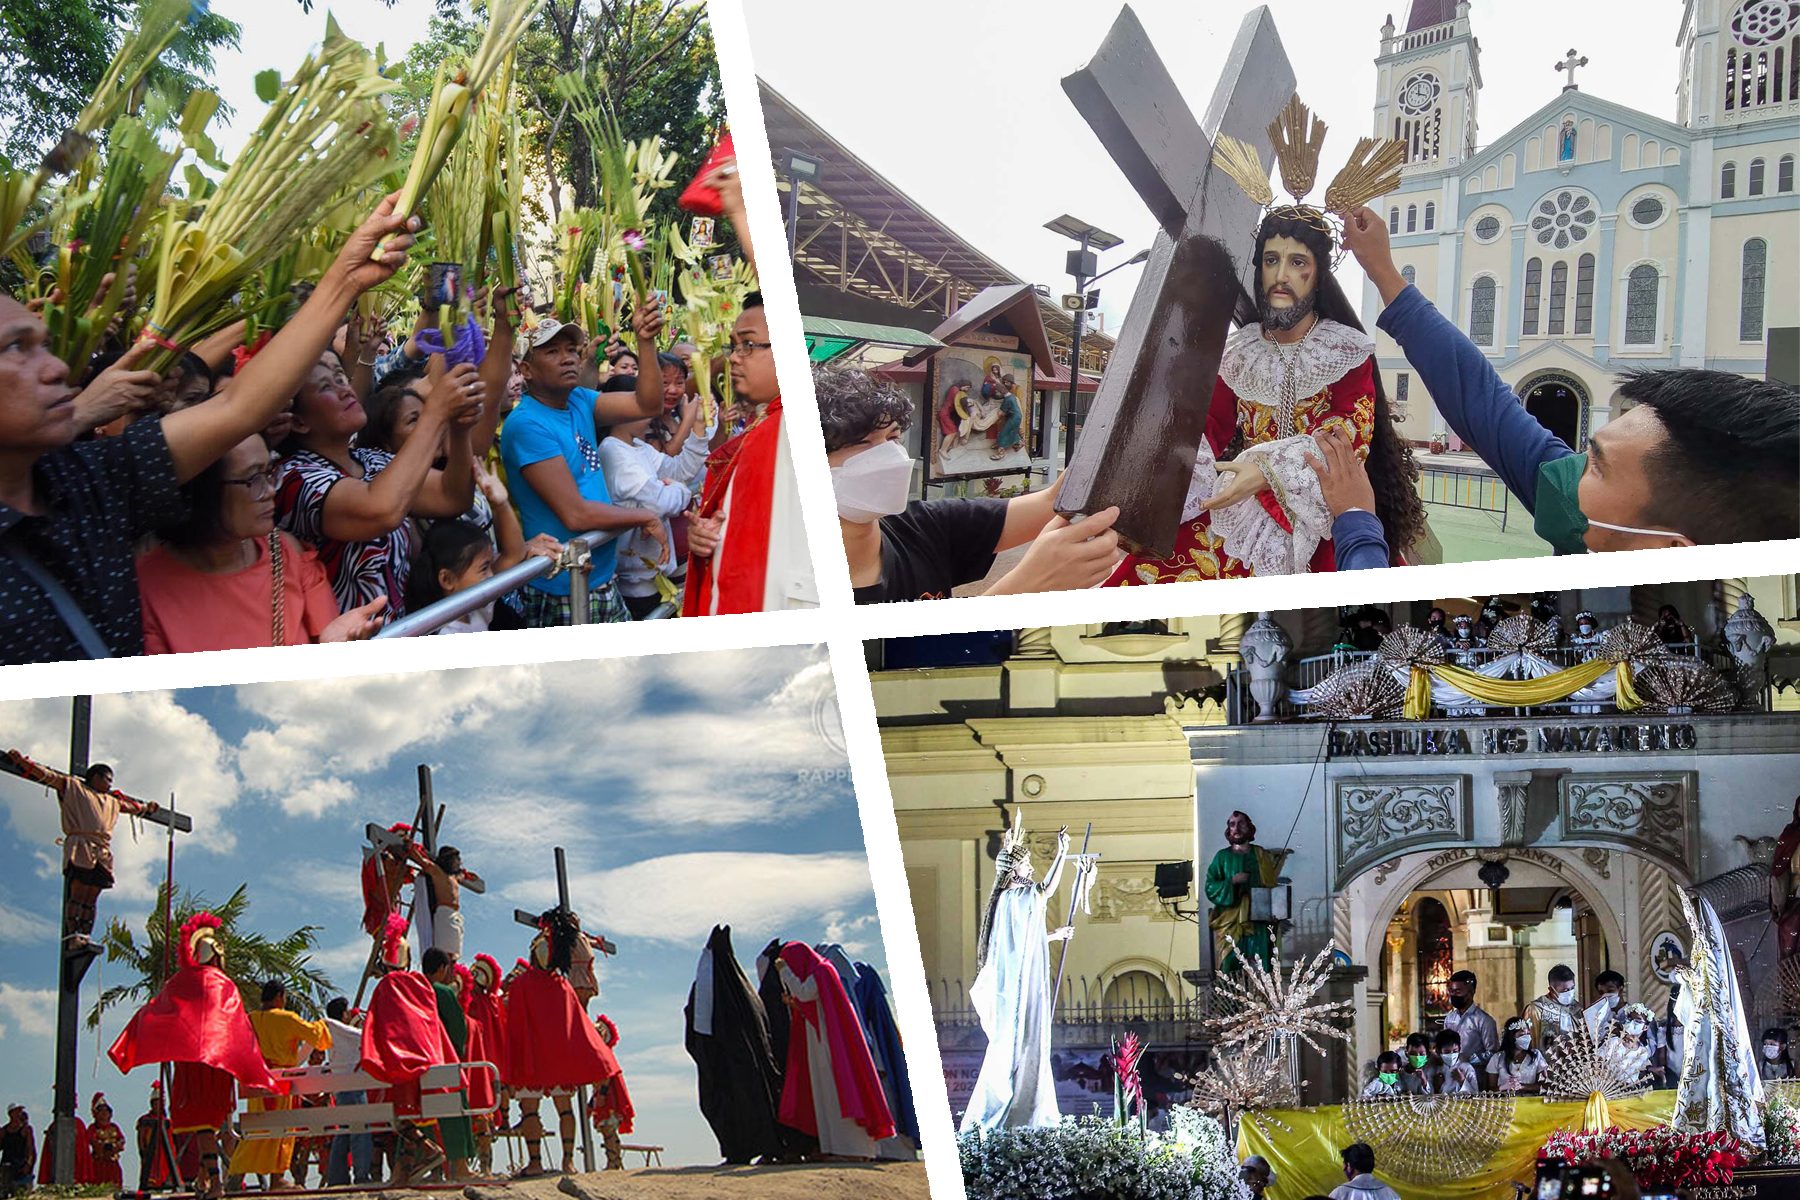 Overview: Holy Week traditions in the Philippines